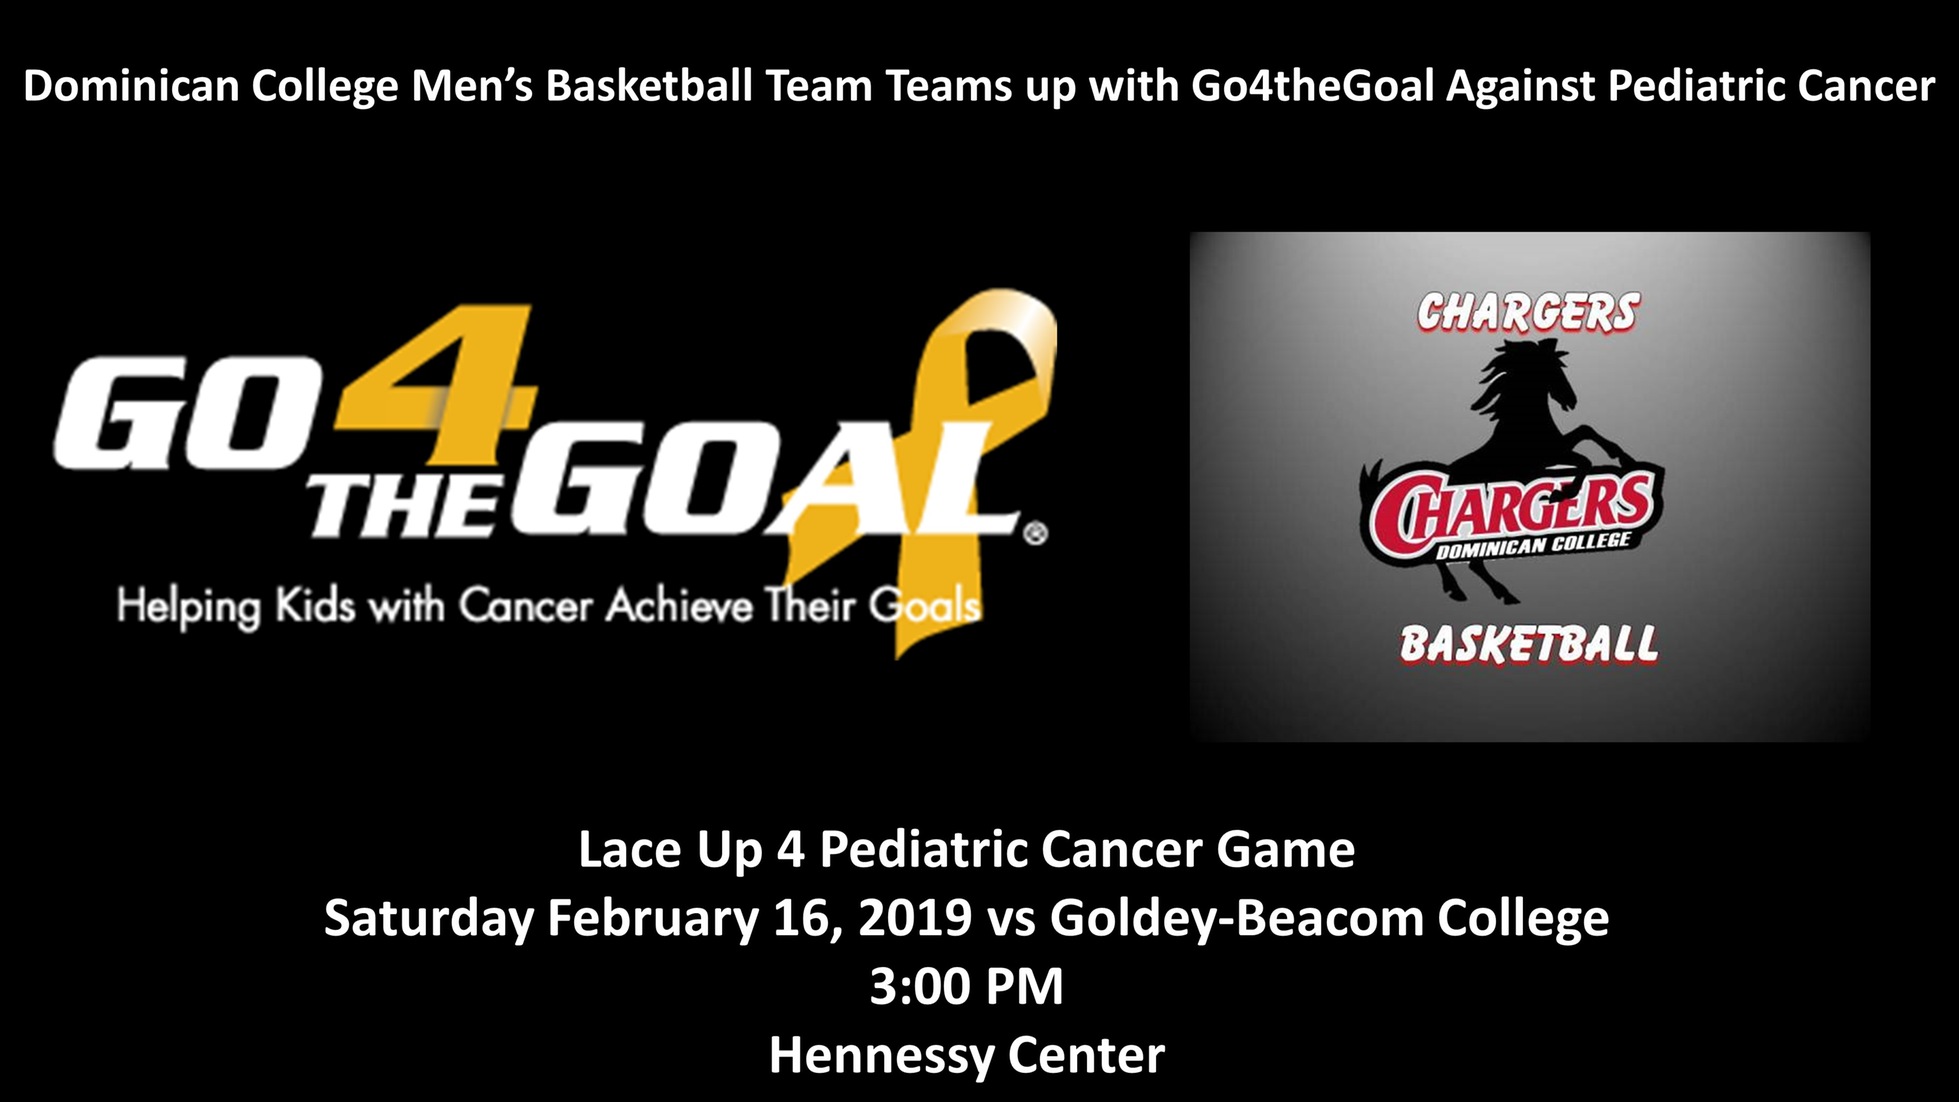 MEN’S BASKETBALL TEAMS UP WITH GO4THEGOAL AGAINST PEDIATRIC CANCER